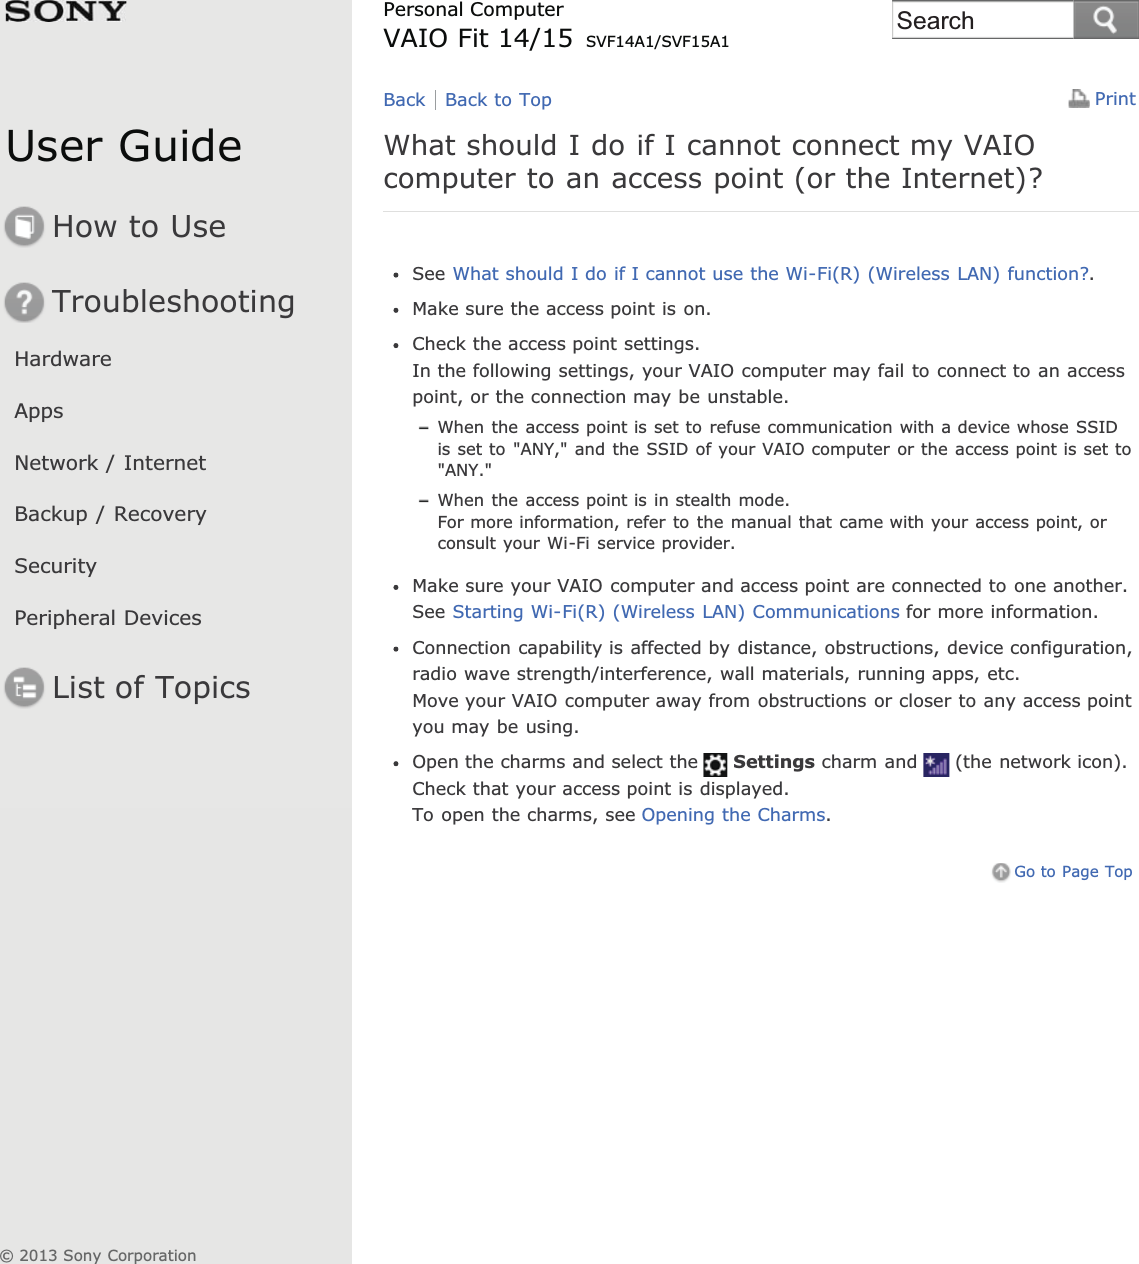 User GuideHow to UseTroubleshootingHardwareAppsNetwork / InternetBackup / RecoverySecurityPeripheral DevicesList of TopicsPrintPersonal ComputerVAIO Fit 14/15 SVF14A1/SVF15A1What should I do if I cannot connect my VAIOcomputer to an access point (or the Internet)?See What should I do if I cannot use the Wi-Fi(R) (Wireless LAN) function?.Make sure the access point is on.Check the access point settings.In the following settings, your VAIO computer may fail to connect to an accesspoint, or the connection may be unstable.When the access point is set to refuse communication with a device whose SSIDis set to &quot;ANY,&quot; and the SSID of your VAIO computer or the access point is set to&quot;ANY.&quot;When the access point is in stealth mode.For more information, refer to the manual that came with your access point, orconsult your Wi-Fi service provider.Make sure your VAIO computer and access point are connected to one another.See Starting Wi-Fi(R) (Wireless LAN) Communications for more information.Connection capability is affected by distance, obstructions, device configuration,radio wave strength/interference, wall materials, running apps, etc.Move your VAIO computer away from obstructions or closer to any access pointyou may be using.Open the charms and select the Settings charm and (the network icon).Check that your access point is displayed.To open the charms, see Opening the Charms.Go to Page TopBack Back to Top© 2013 Sony CorporationSearch